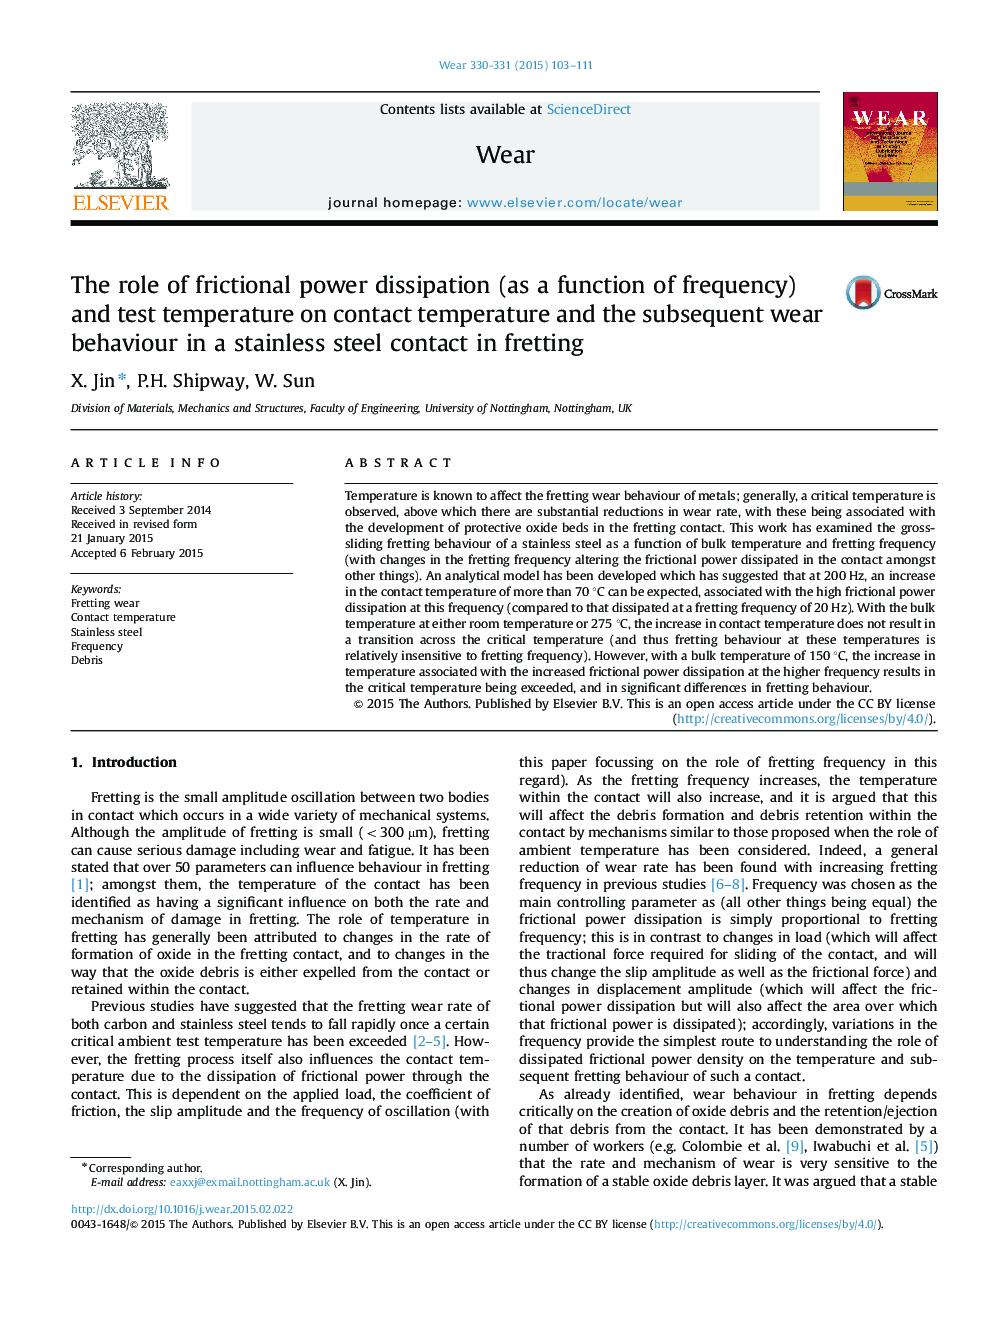 The role of frictional power dissipation (as a function of frequency) and test temperature on contact temperature and the subsequent wear behaviour in a stainless steel contact in fretting